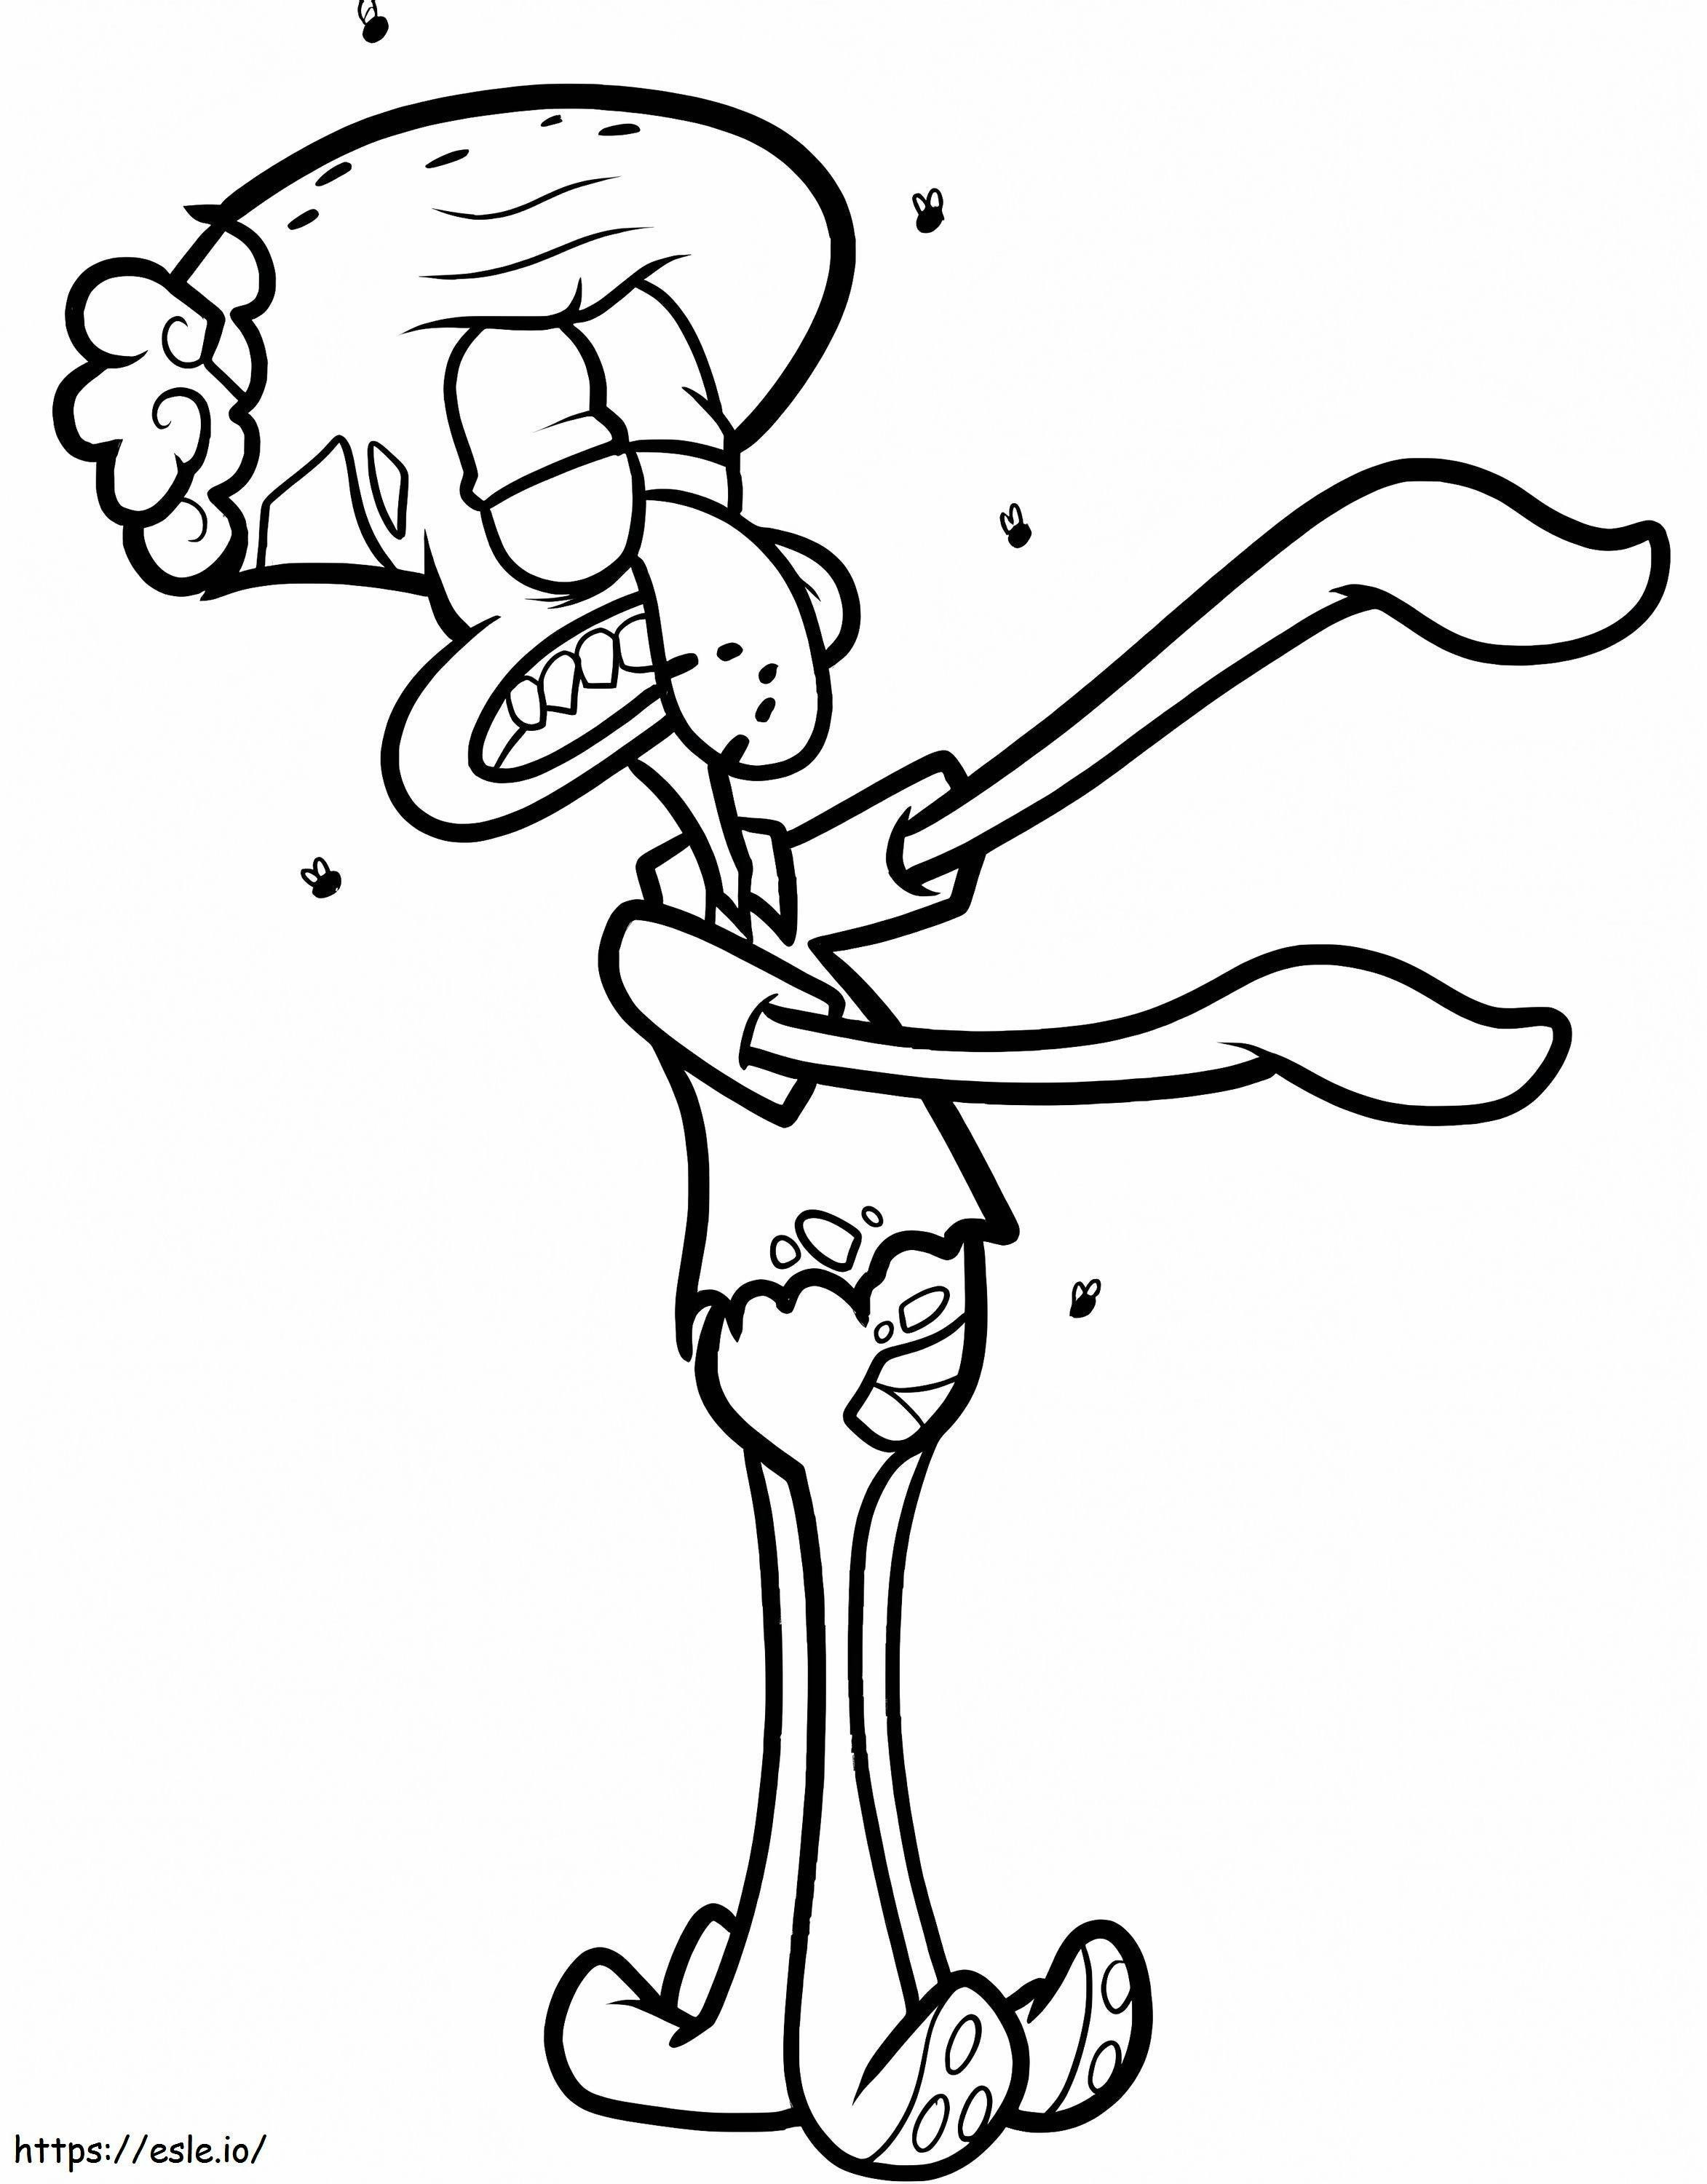 Zombie Squid Tentacles coloring page